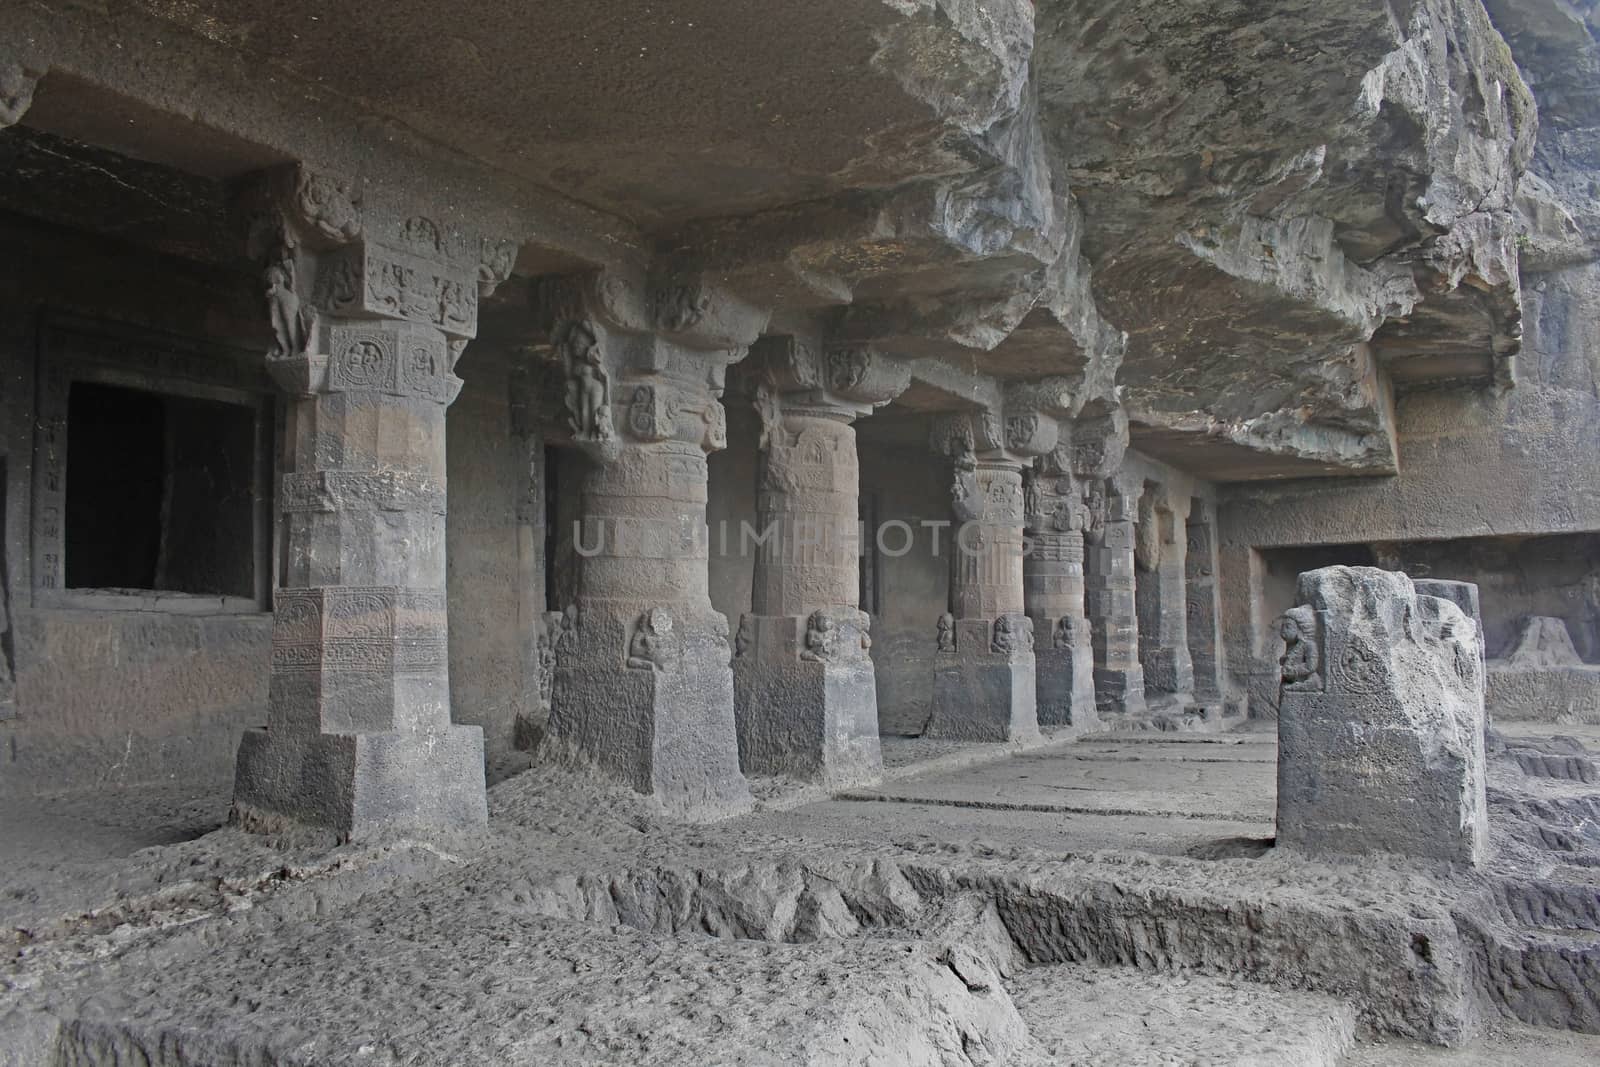 The Aurangabad caves are 12 artificial rock-cut Buddhist shrines located on a hill running roughly east to west, nearly 2 km north from Bibi Ka Maqbara in Aurangabad, Maharashtra, India. The Aurangabad Caves were dug out of comparatively soft basalt rock during the 6th and 7th century. Caves are divided into three separate groups depending on their location.